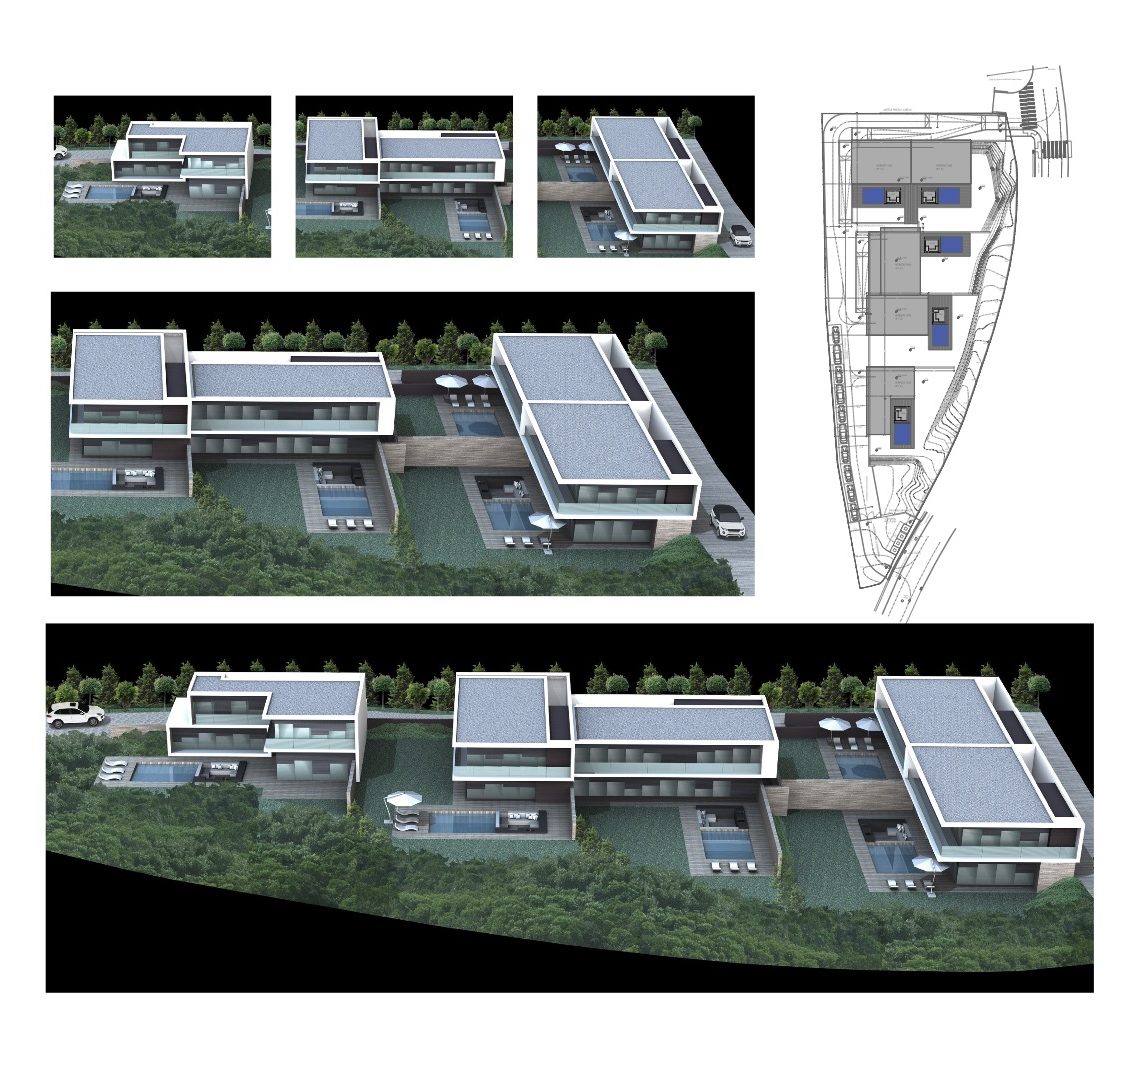 Murches Residential Condominium, Cascais - 4 houses - 1,350 sq m of gross building area on a plot of 2,769 sq m.